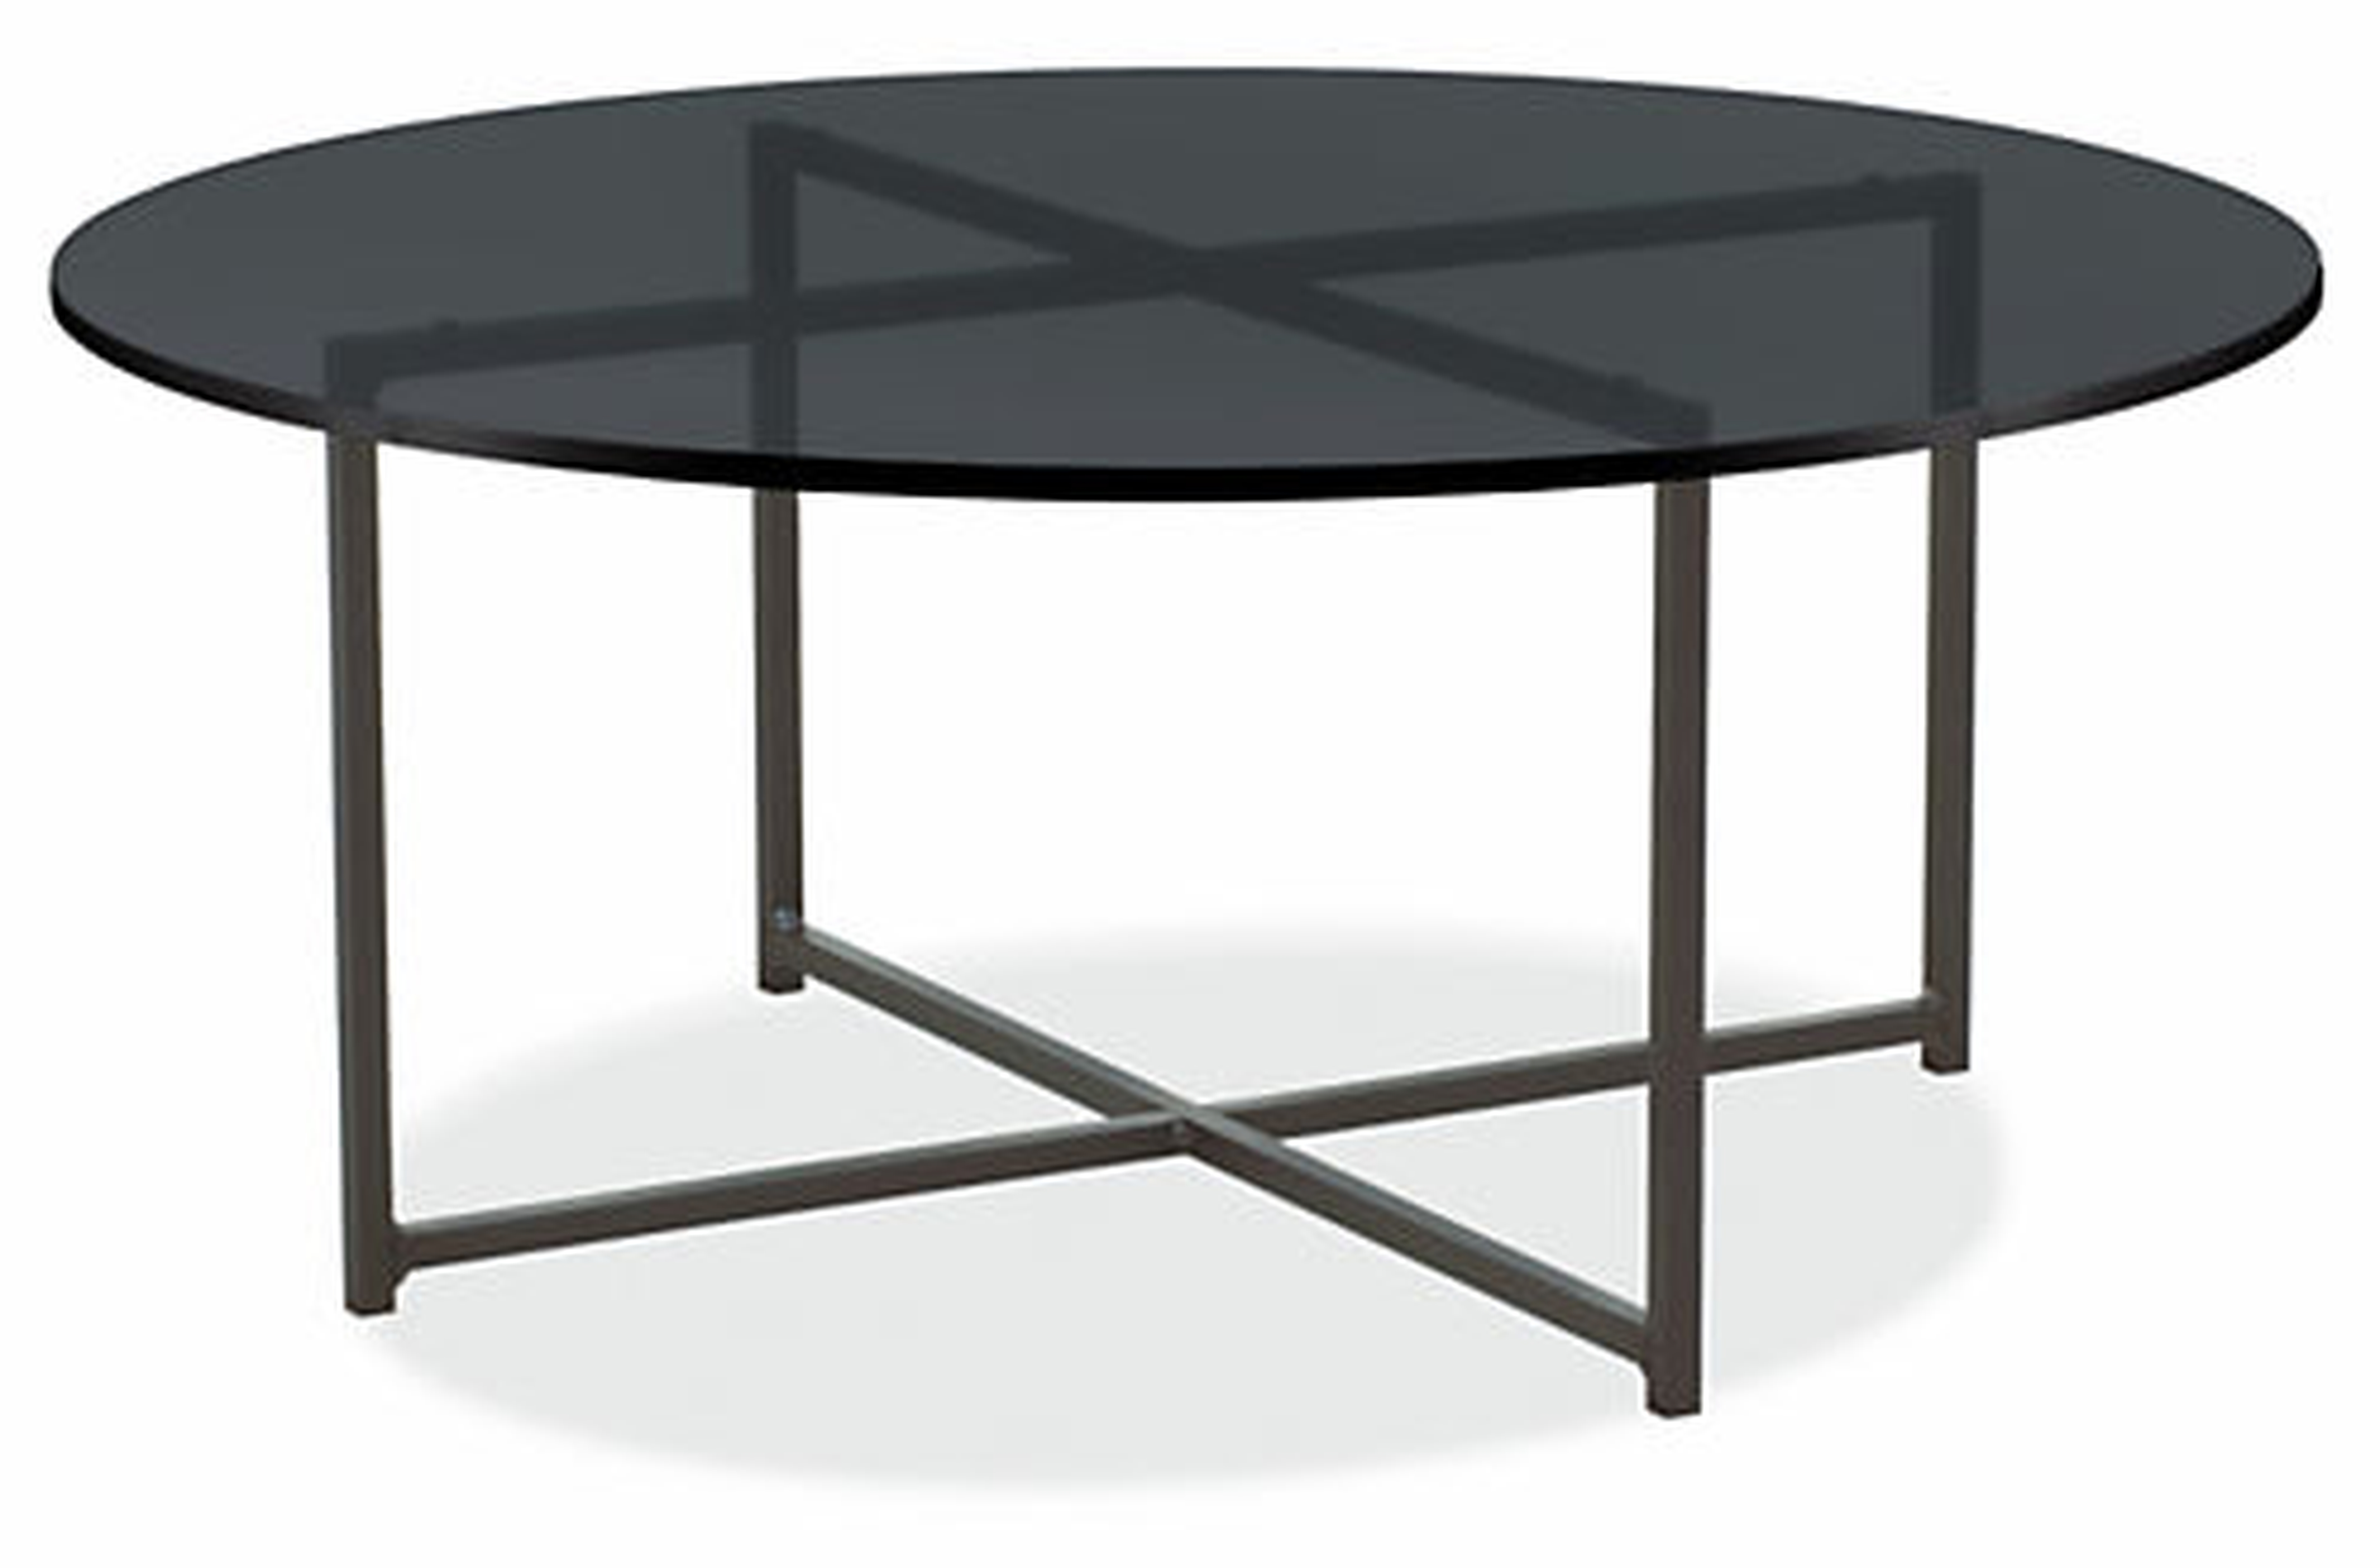 Classic Coffee Tables in Natural Steel - 36", Smokoe Tempered Glass - Room & Board